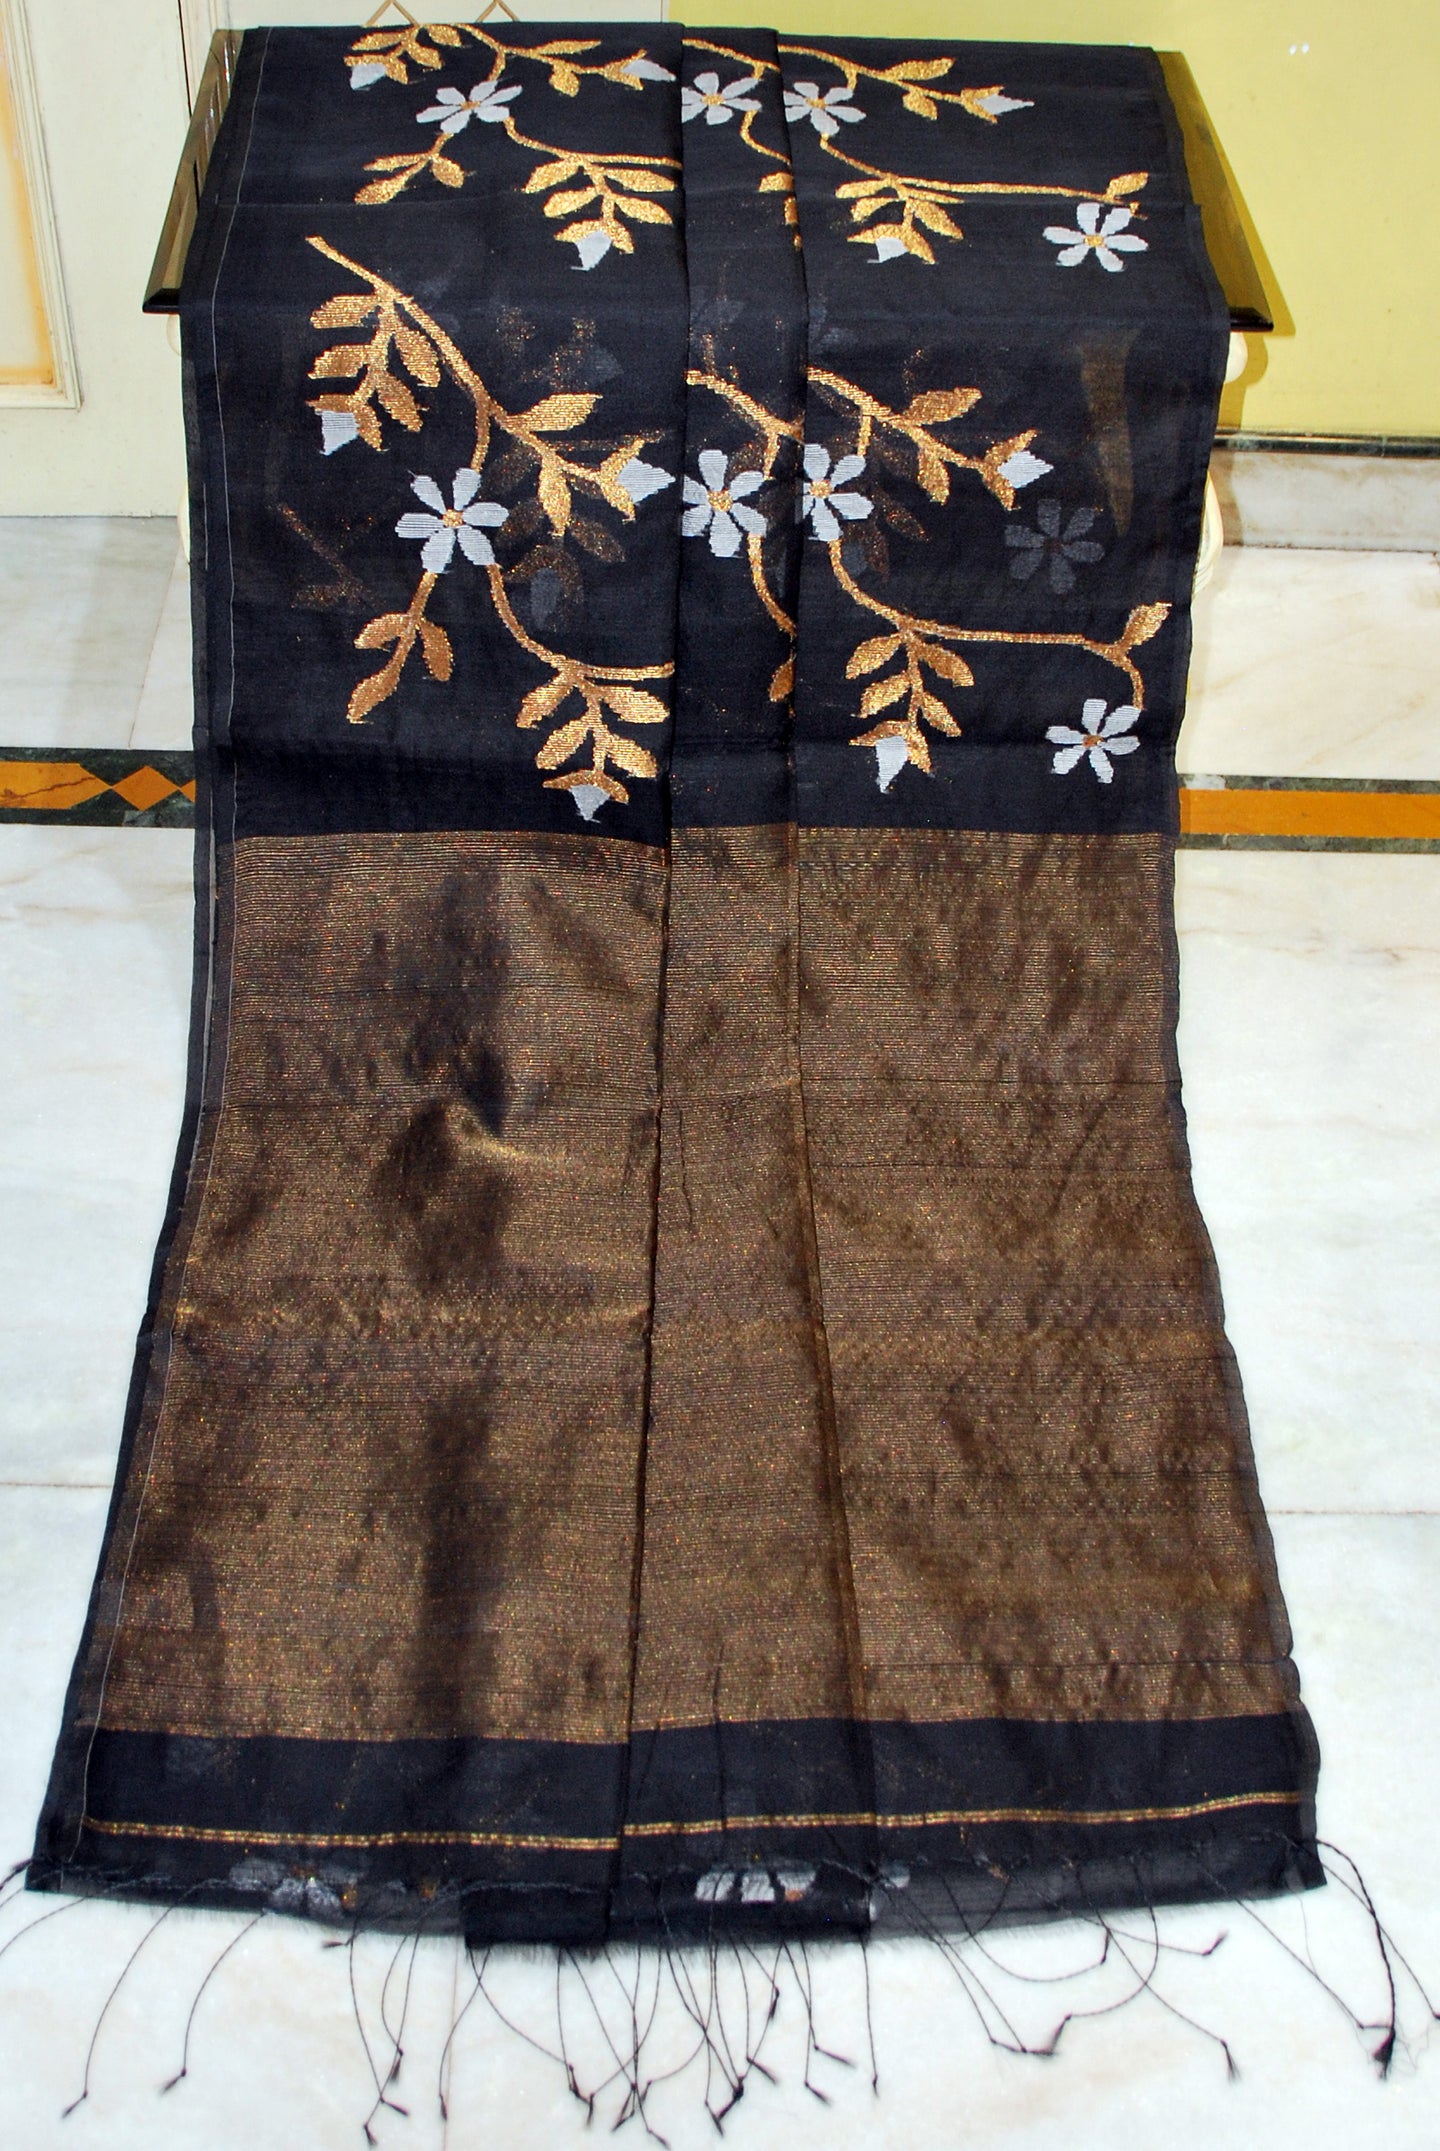 Premium Poth Muslin Silk Jamdani Saree with Jaal Floral Work in Black, Off White and Golden